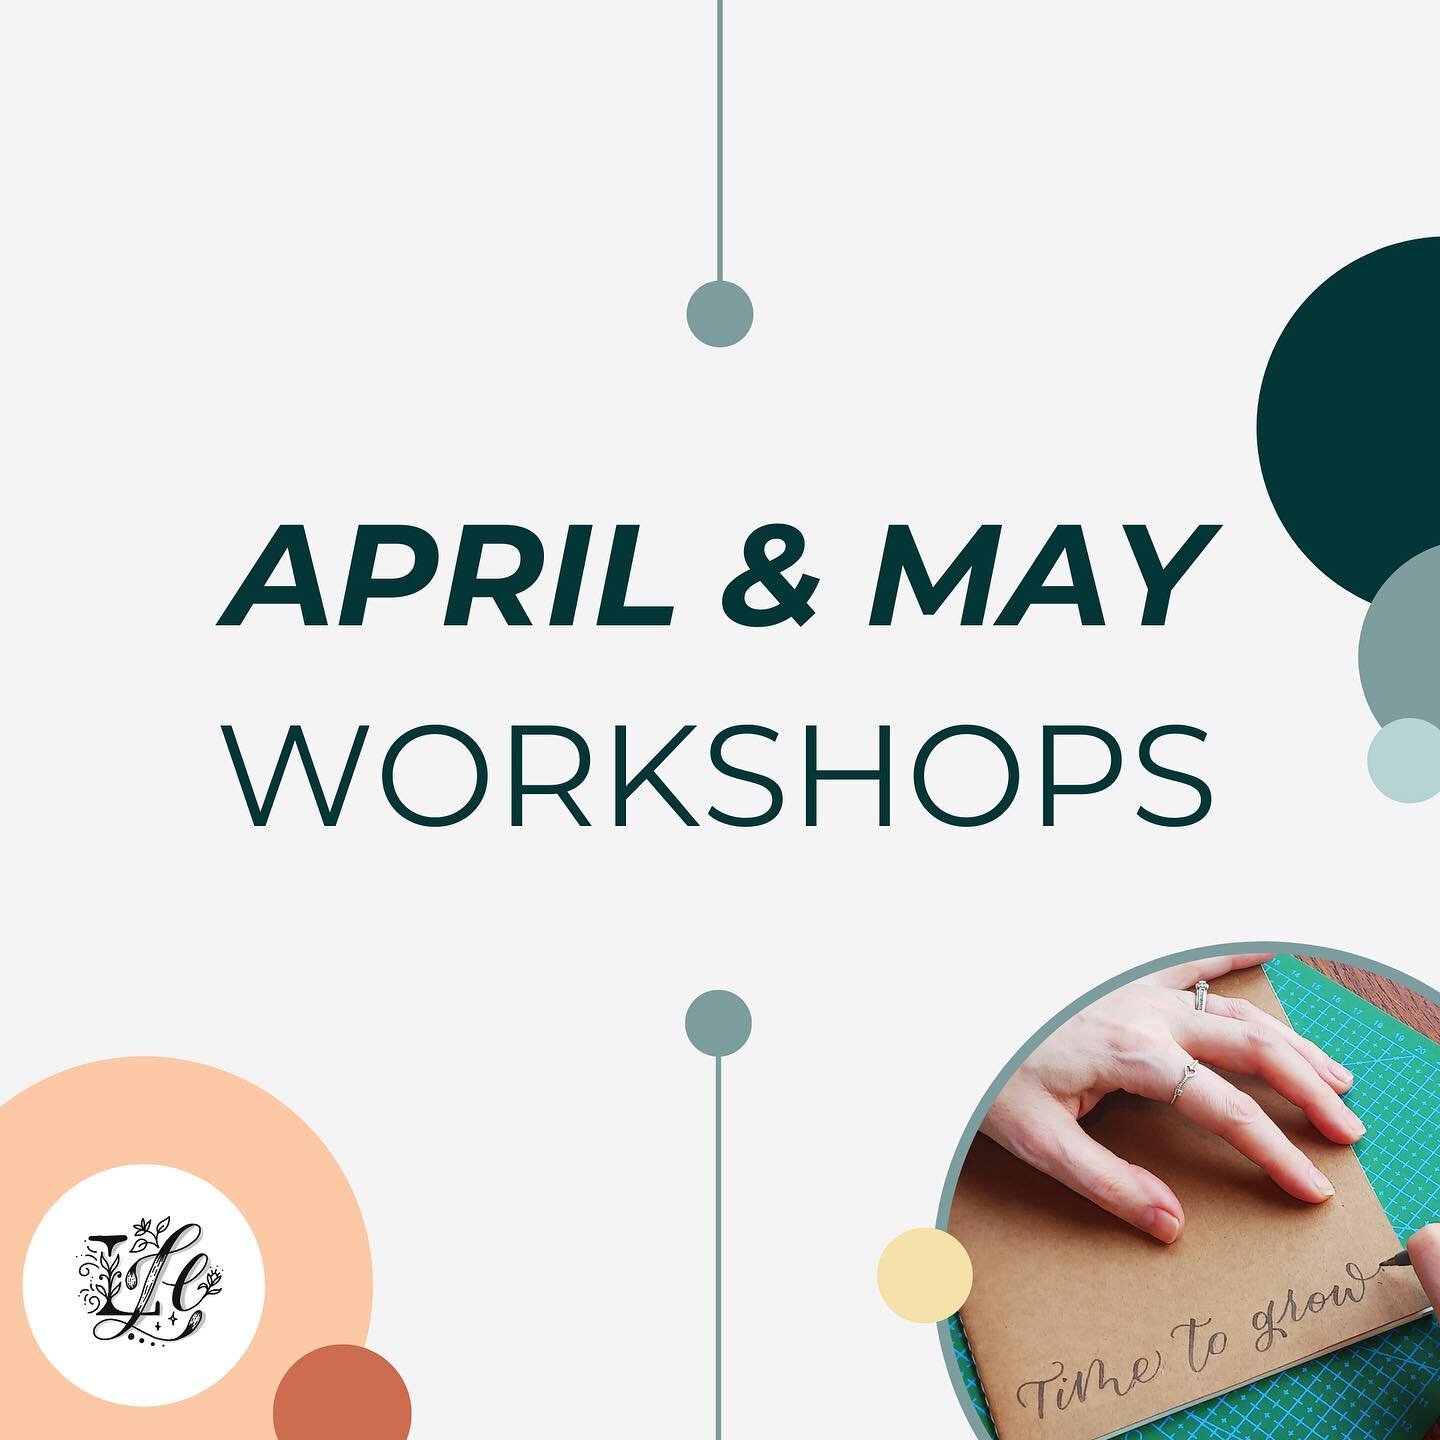 SPRING IS OFFICIALLY HERE 🌷🌼🪻🌻 &hellip;and up has sprung all these lovely events to get your calligraphy going (and growing!).

From wood block printing with @zena_and_rose to sparkling wine tasting with @victoriadaskalwine and another bottomless